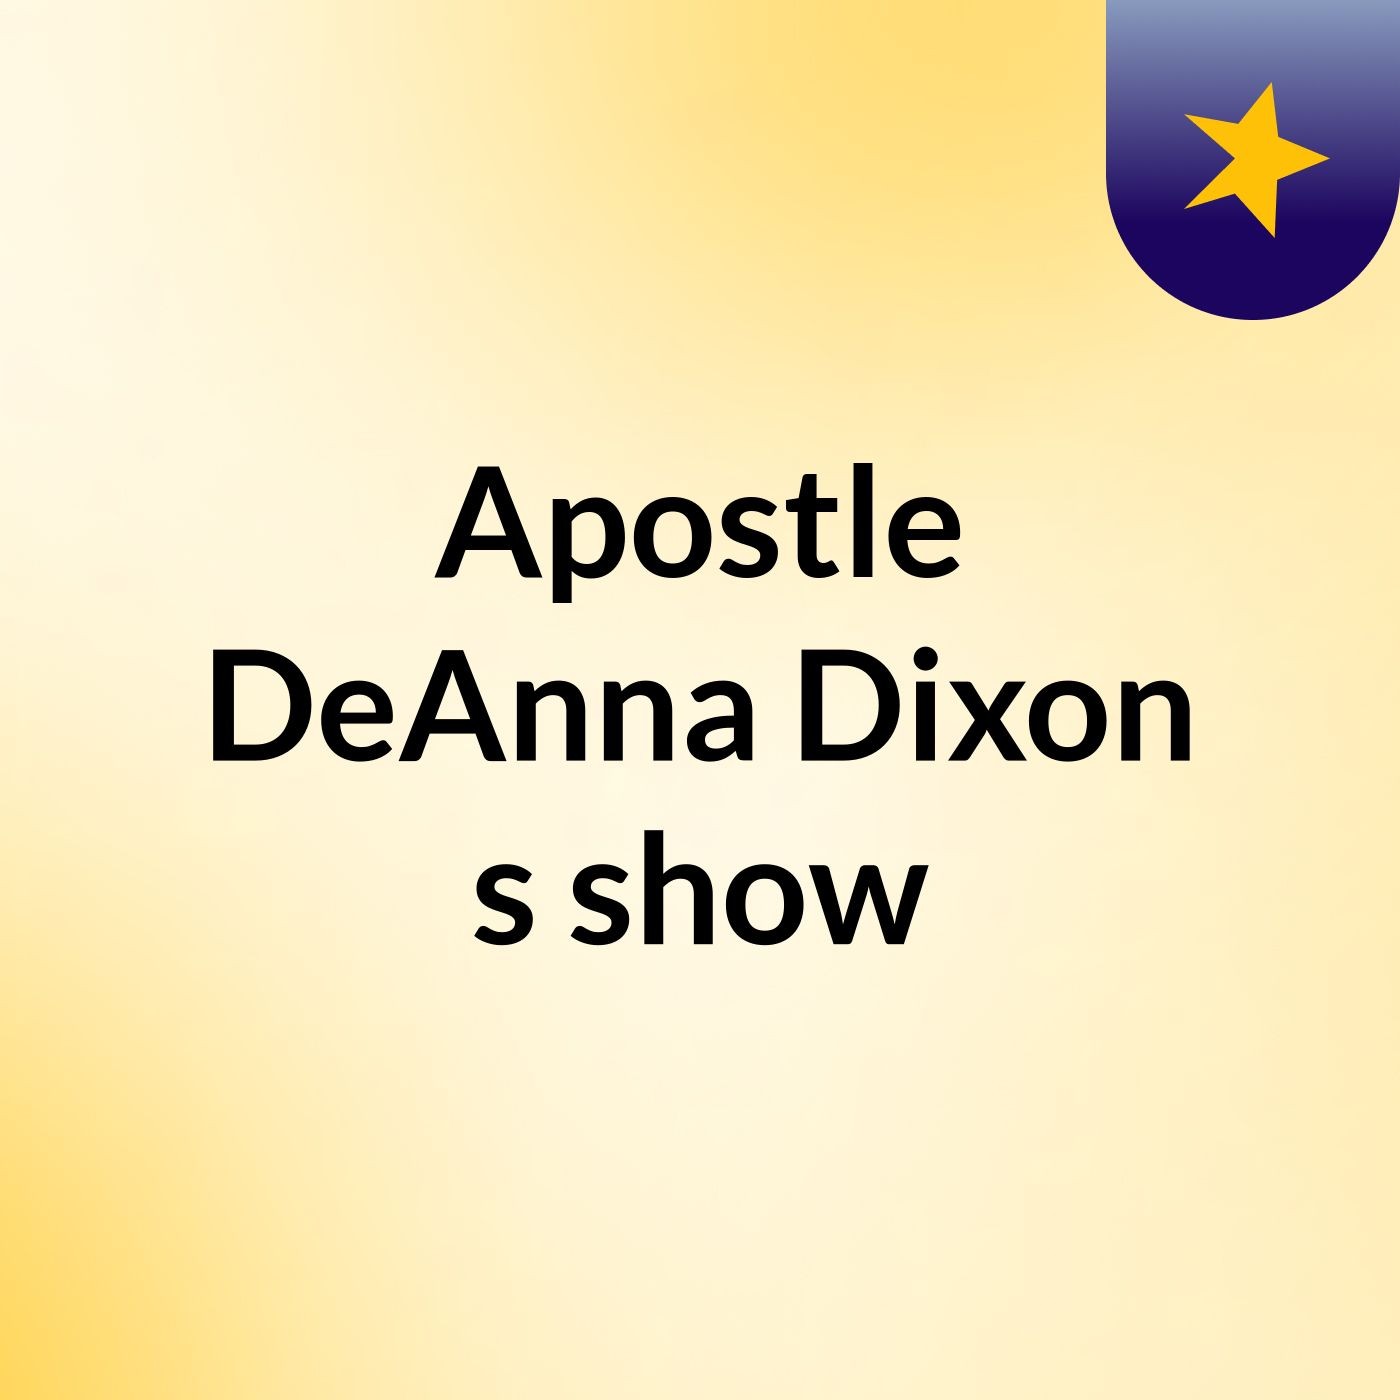 ROMEO AND JULIET SONG BY APOSTLE DEANNA DIXON